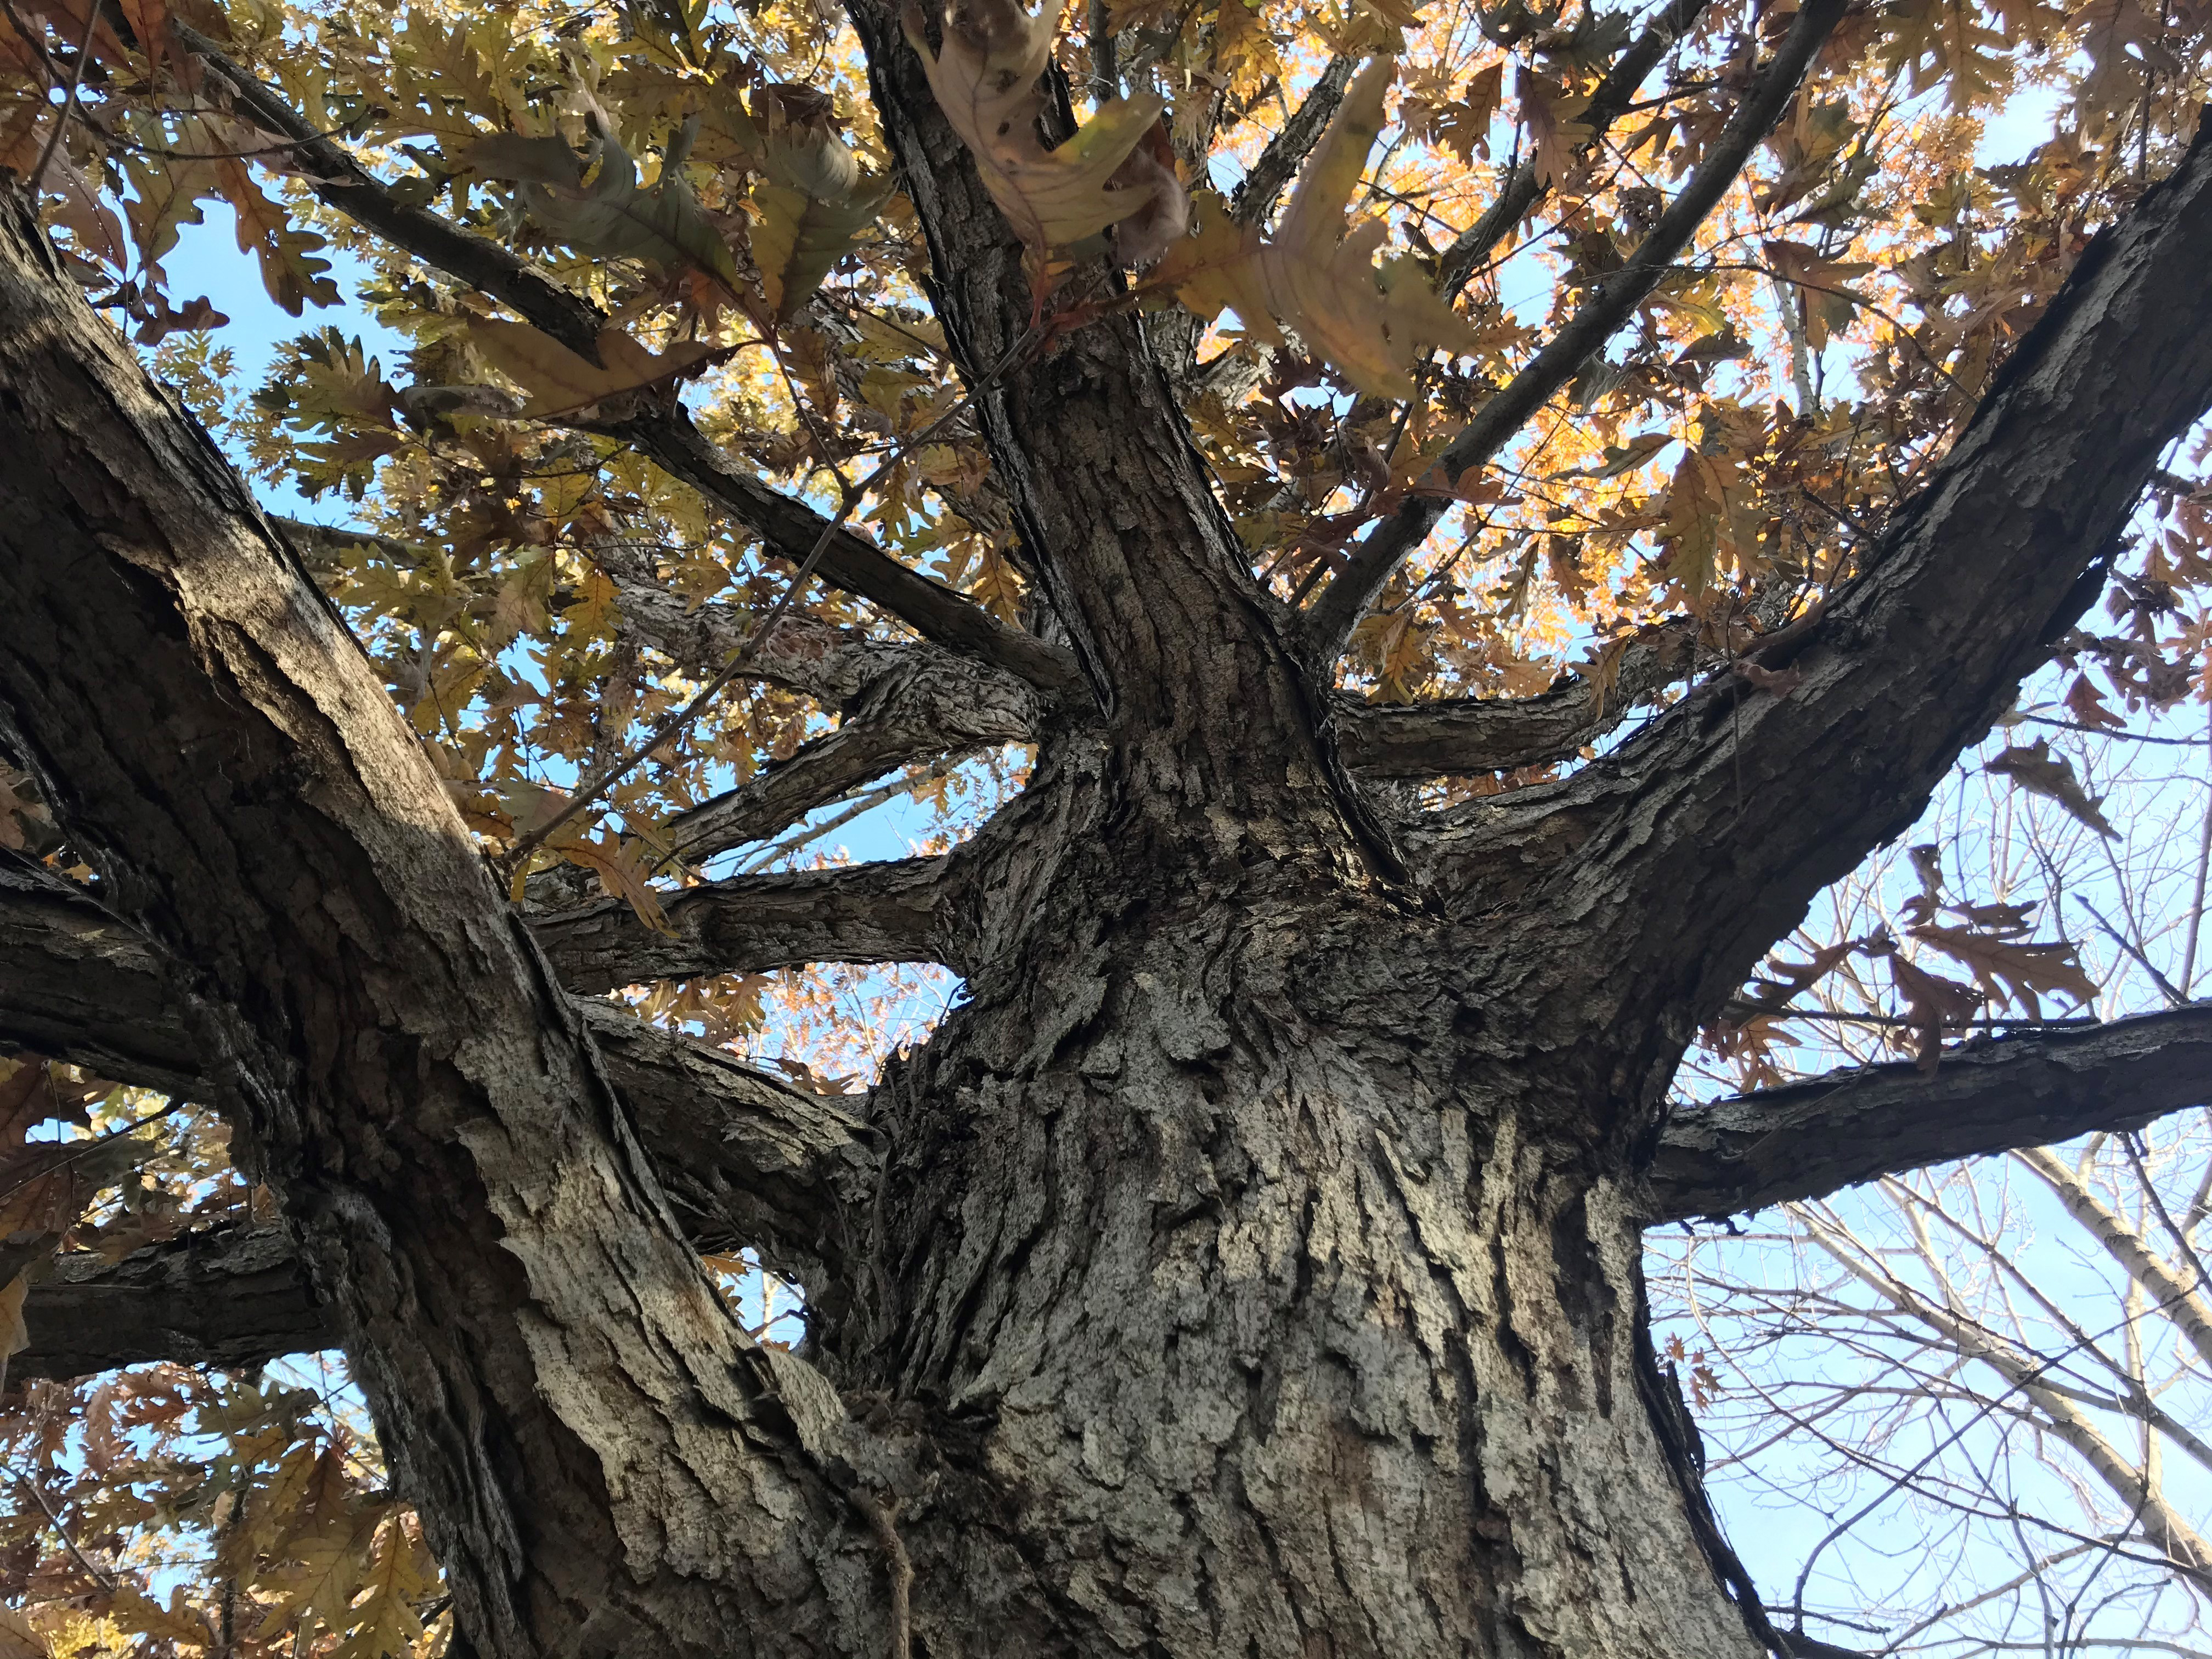 The bark of the Quercus alba, white oak. The tree can be found on the Walk Across Kentucky at The Arboretum. Photo provided by Emily Ellingson